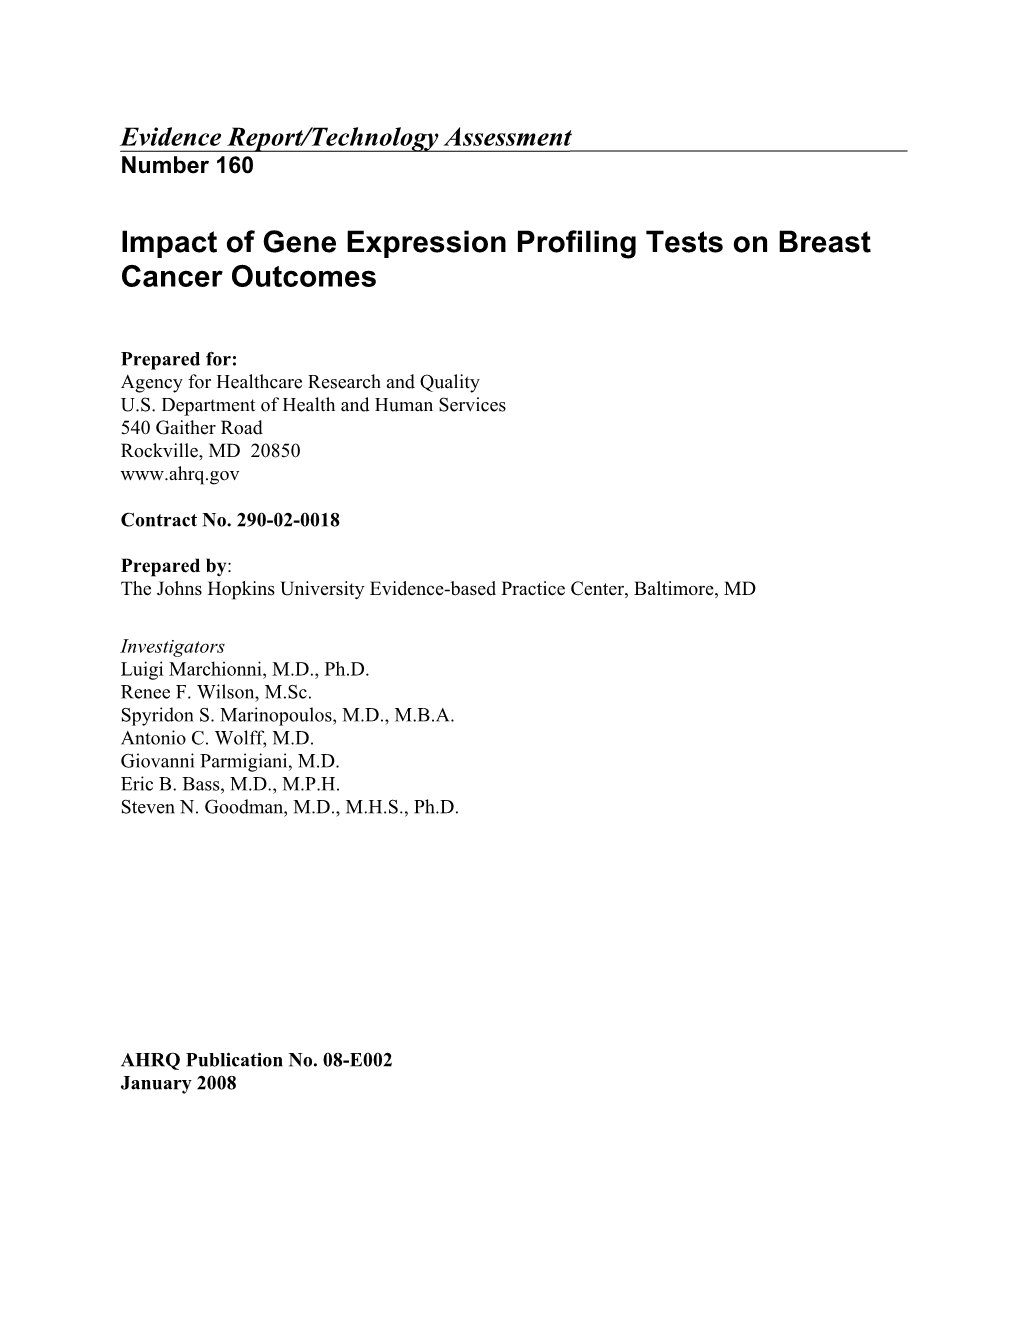 Impact of Gene Expression Profiling Tests on Breast Cancer Outcomes